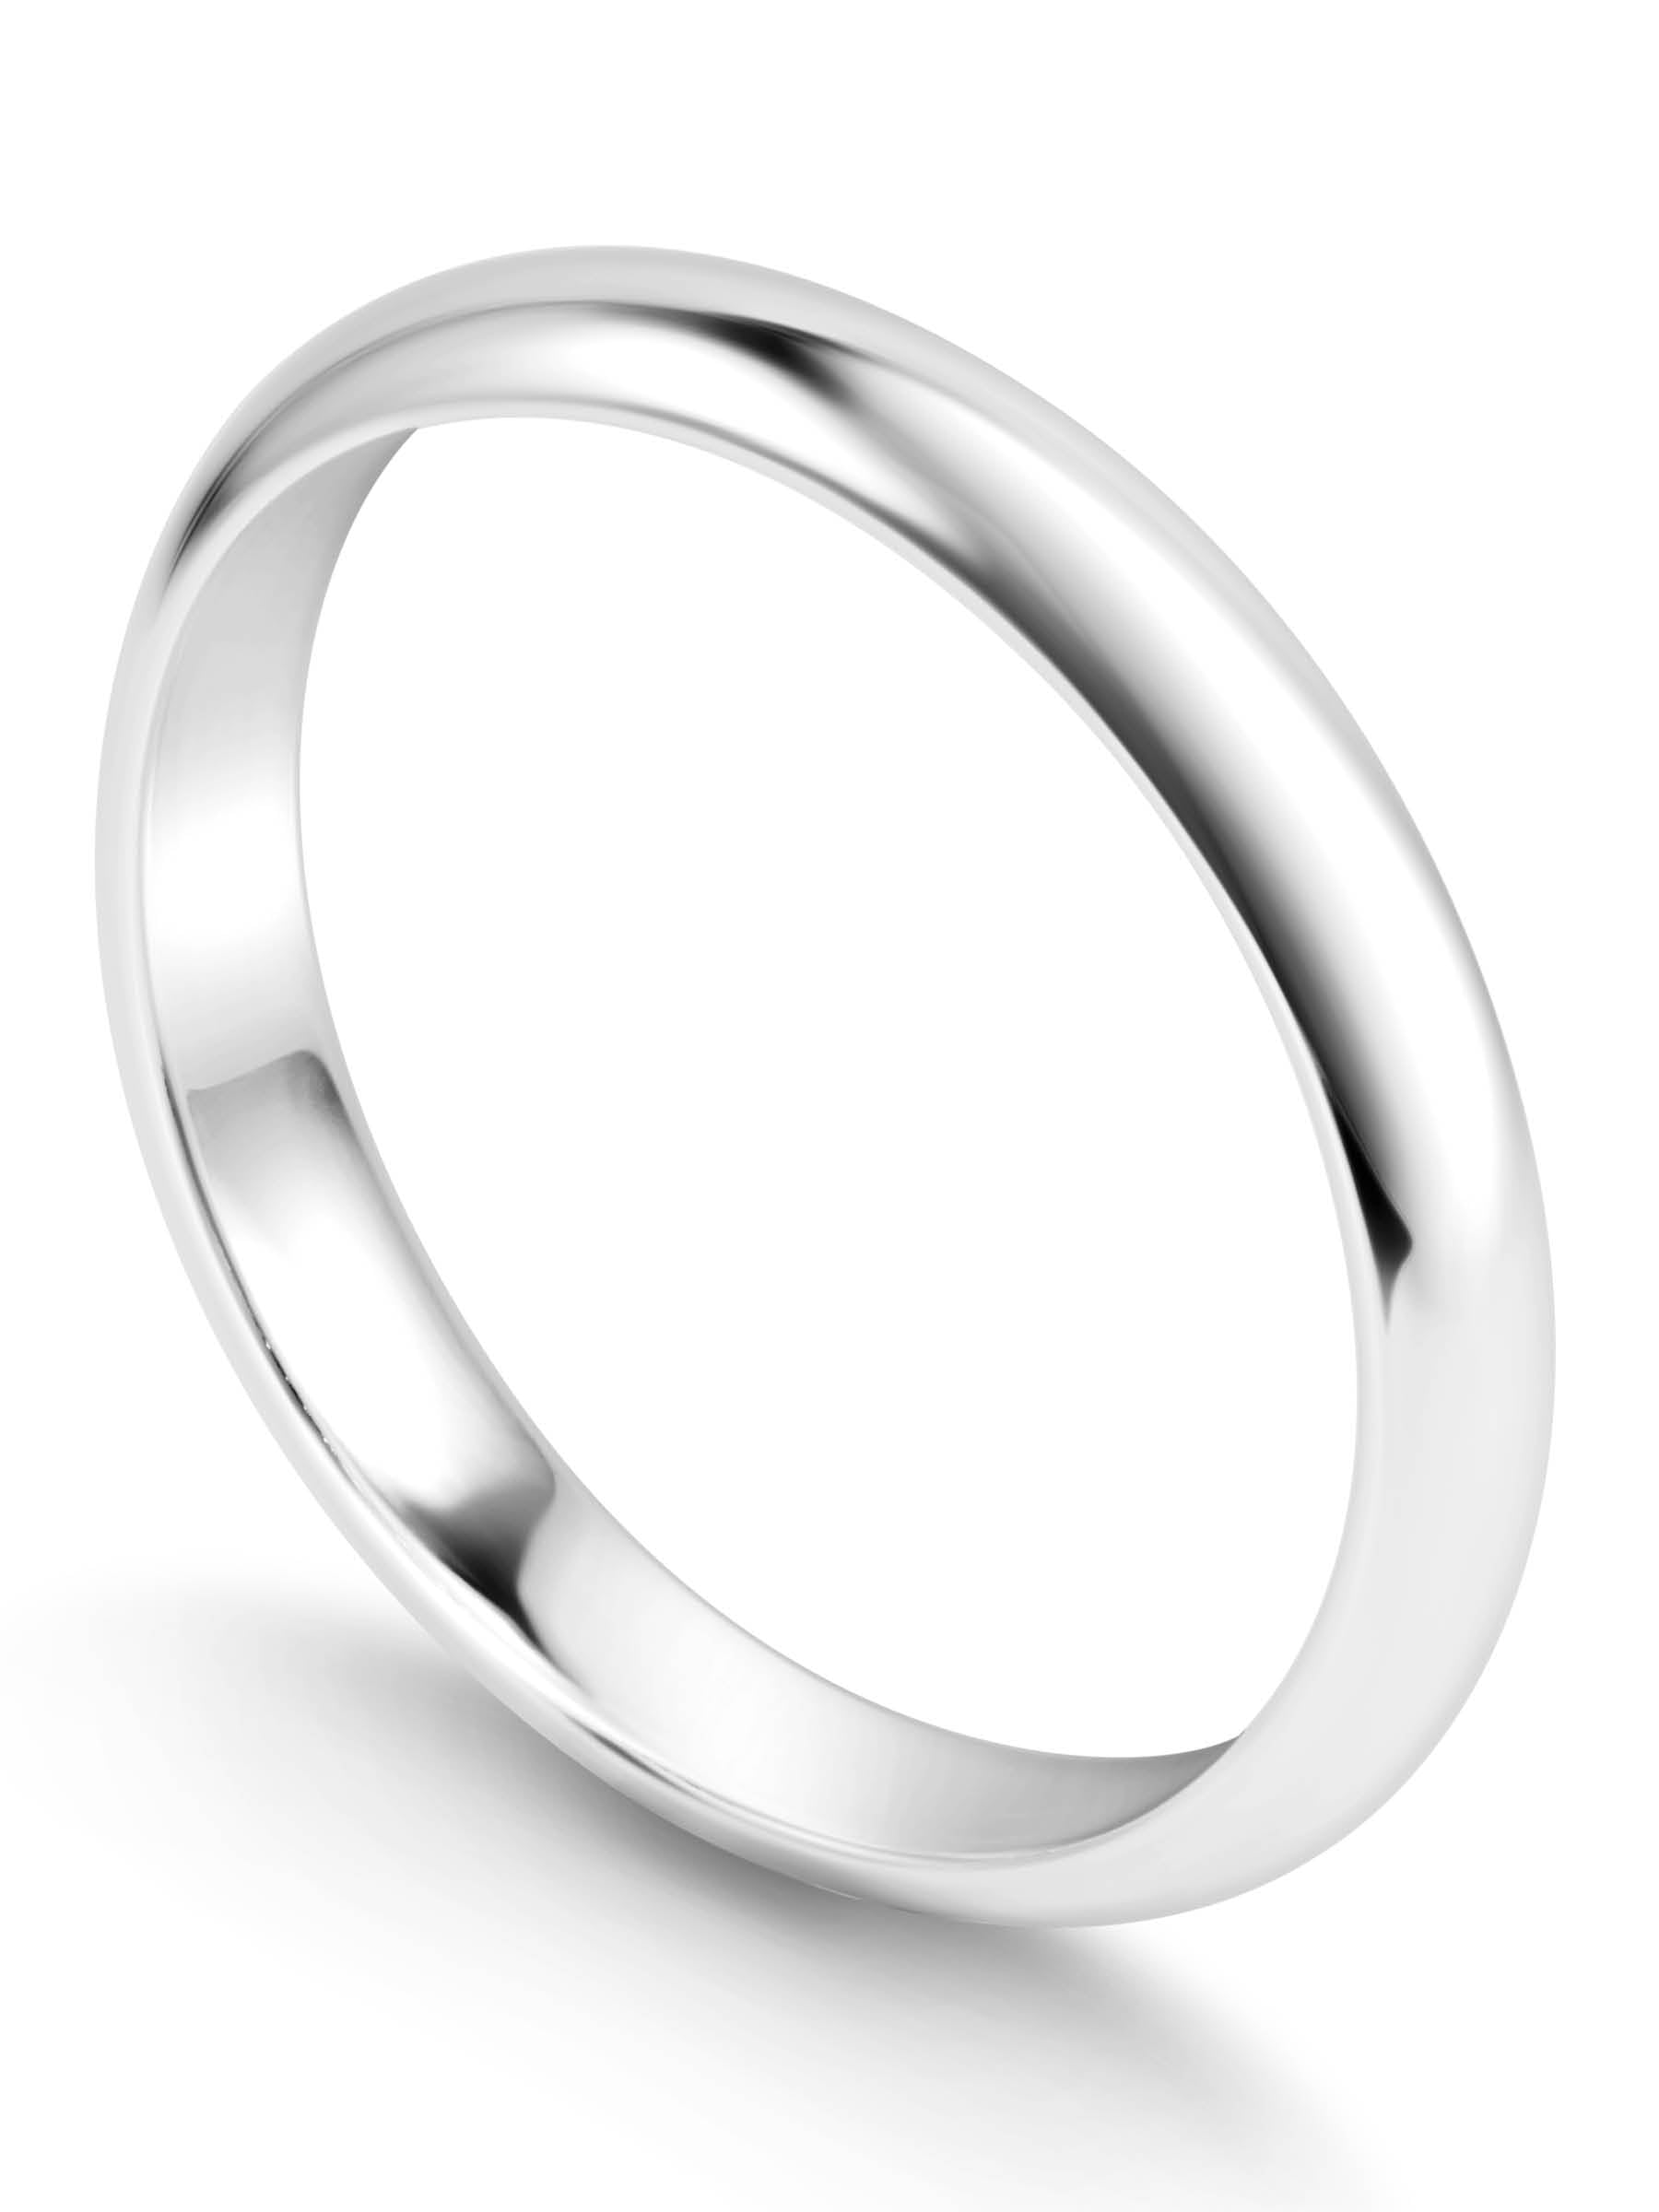 Find Your Ring Size At Home With The Ring Size App™ by Hitched